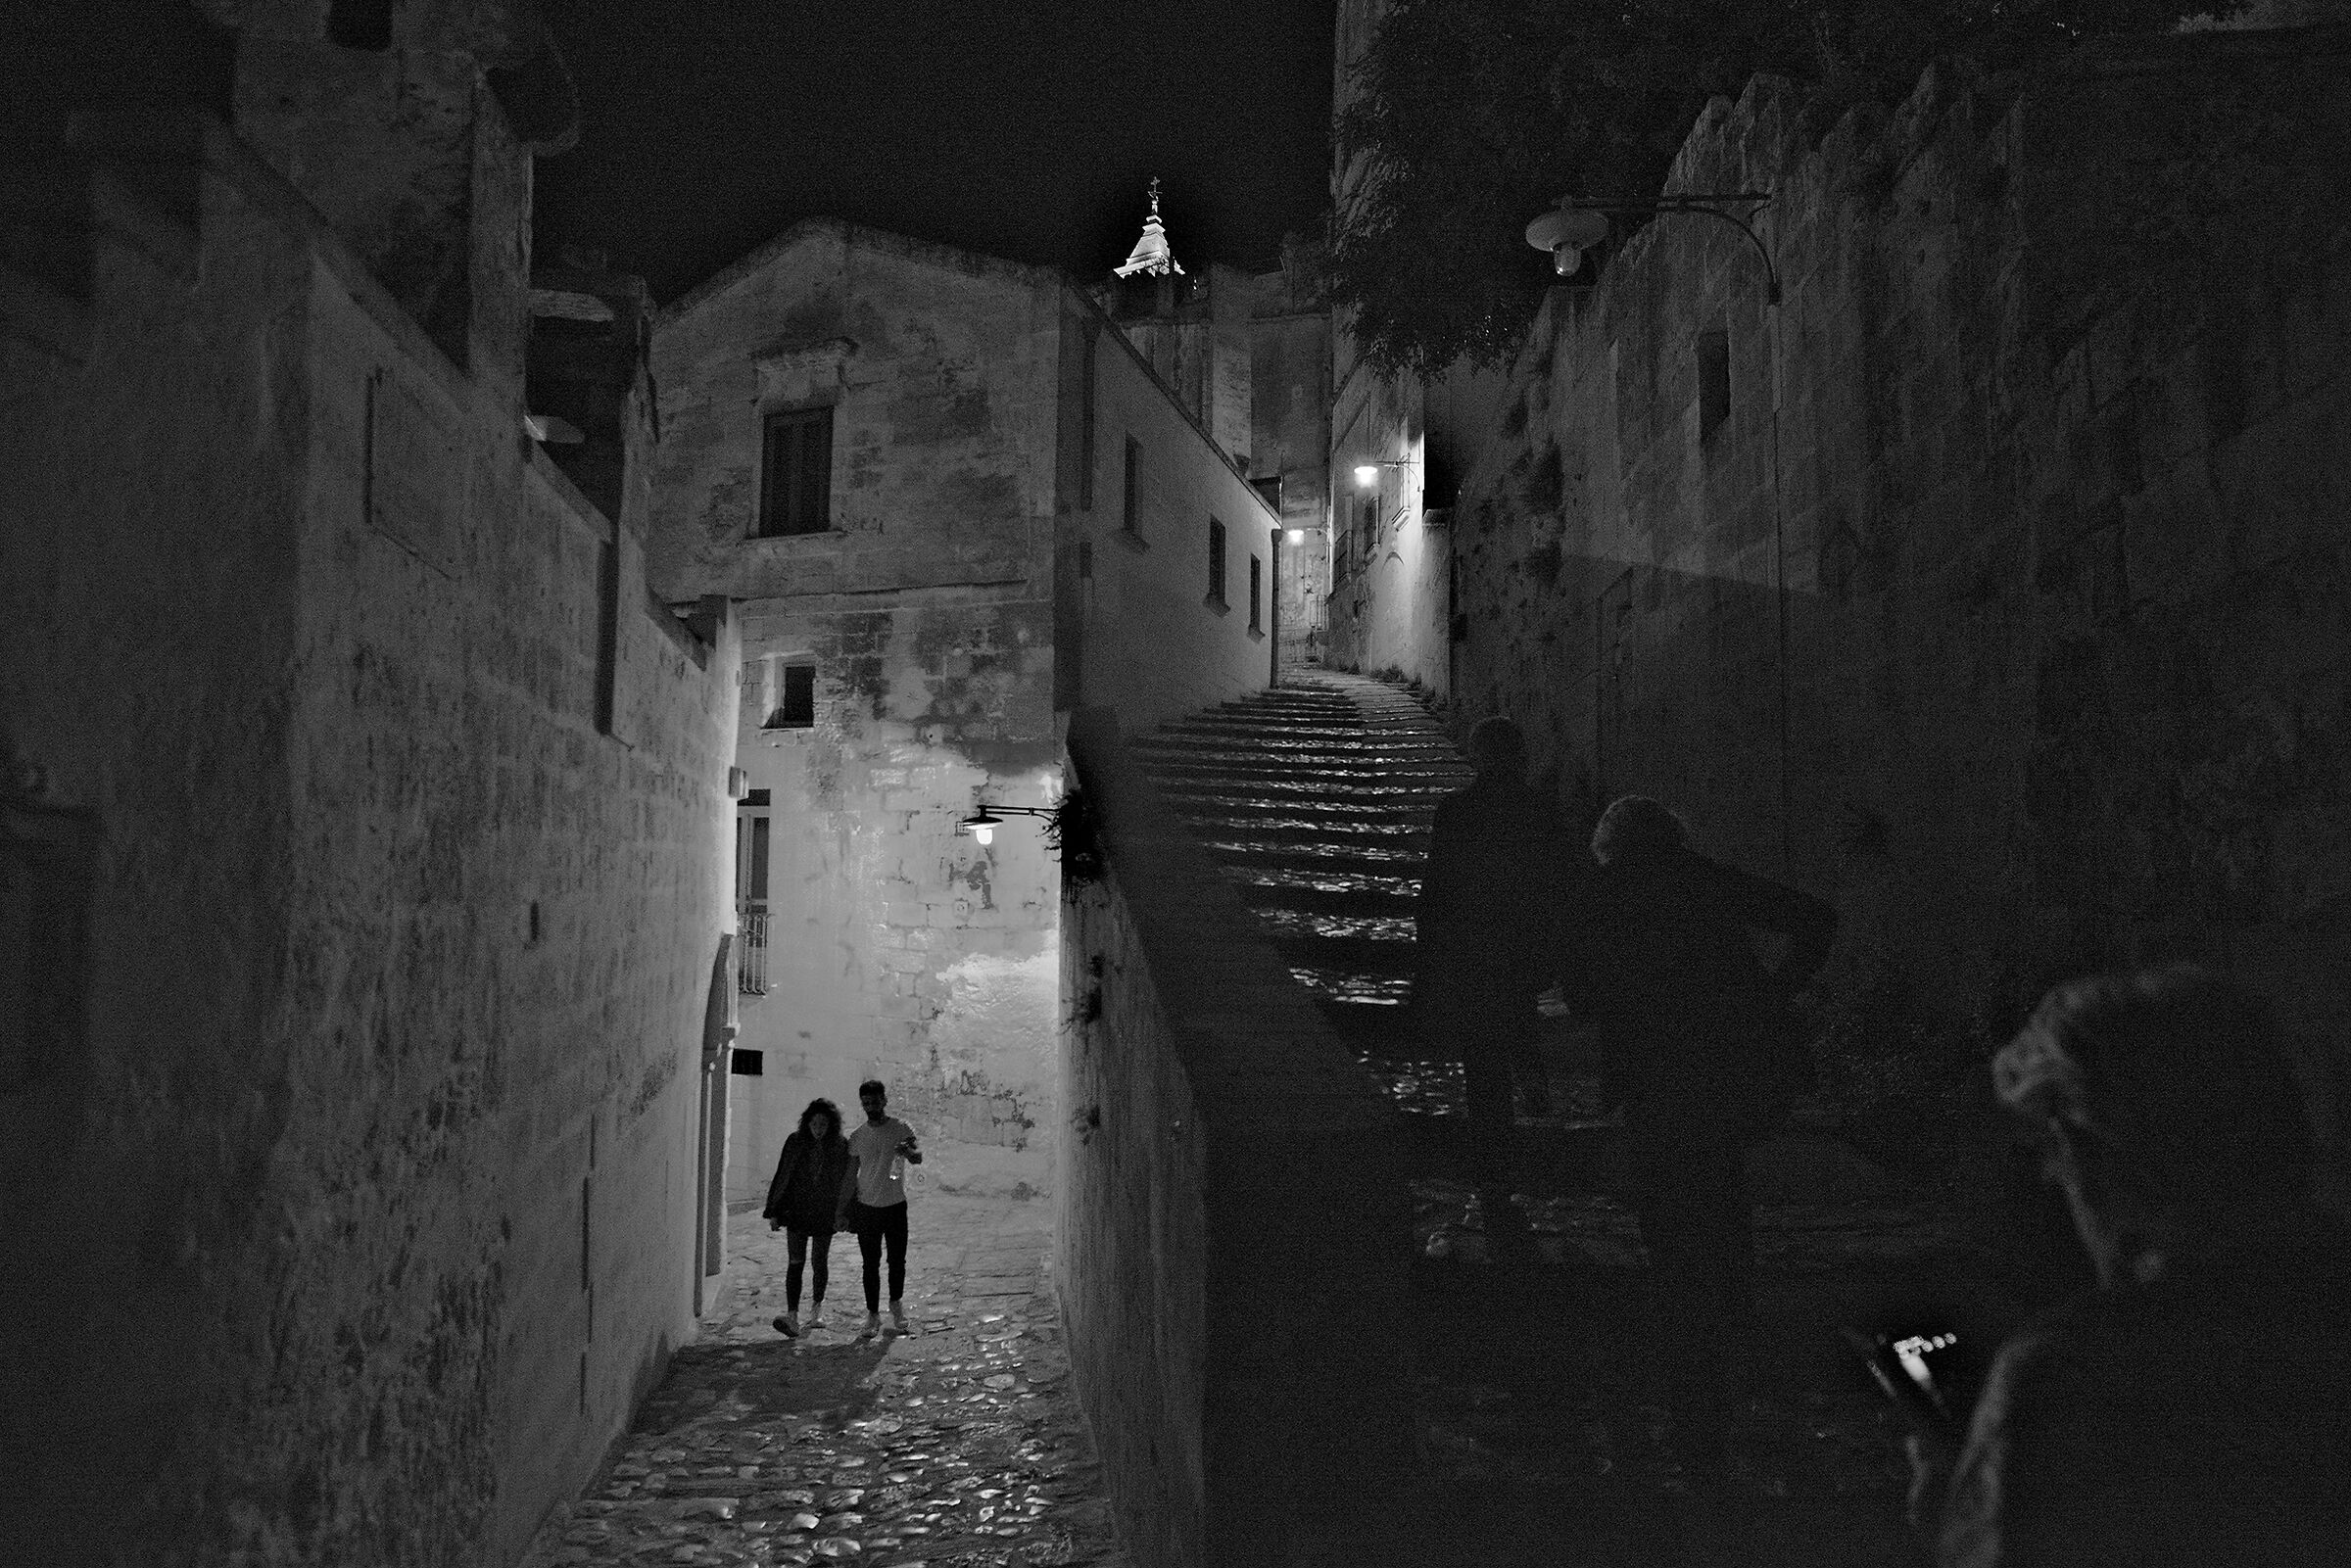 On the streets of ancient Matera...